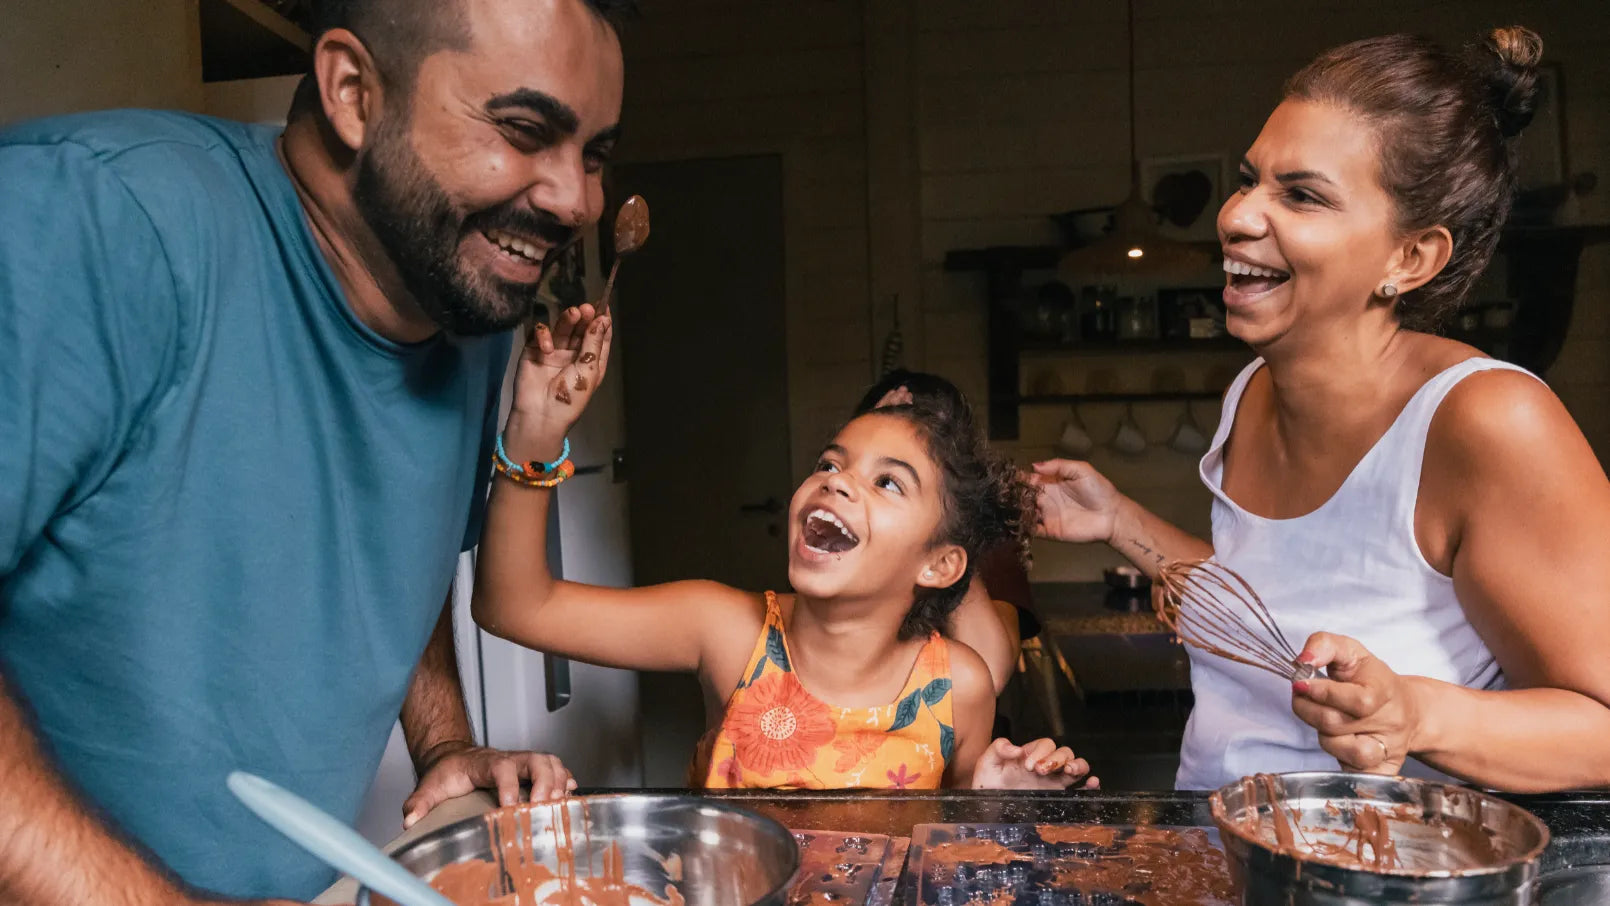 A family cooking and laughing. The dad is on the left, a daughter in the middle, the mom is on the right. The daughter is putting chocolate on the dad's face